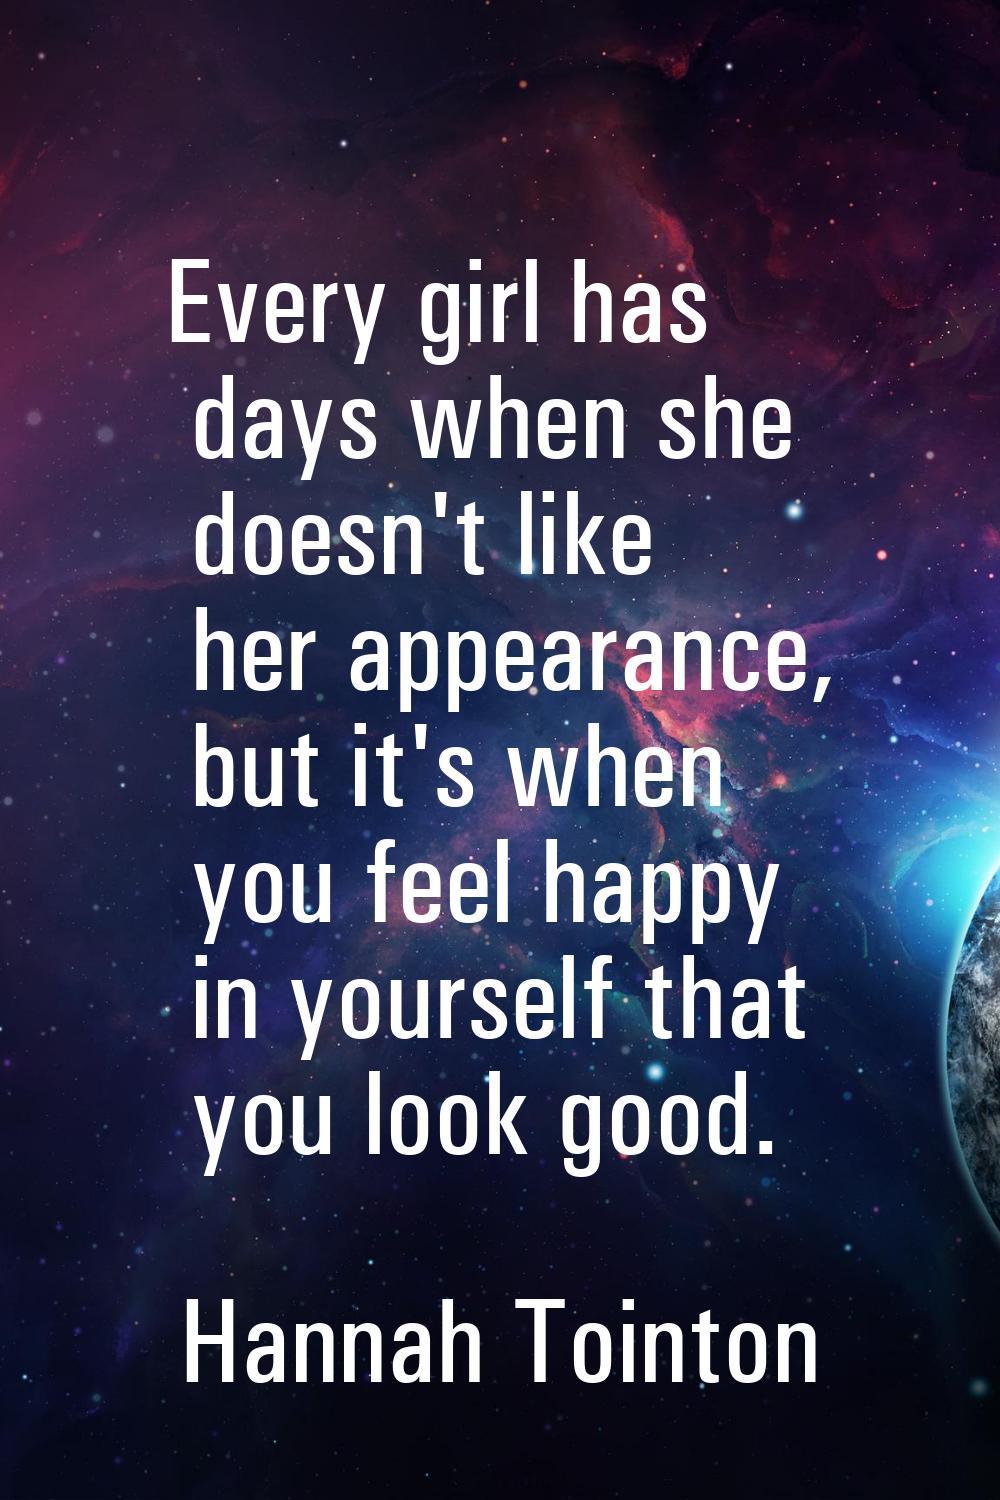 Every girl has days when she doesn't like her appearance, but it's when you feel happy in yourself 